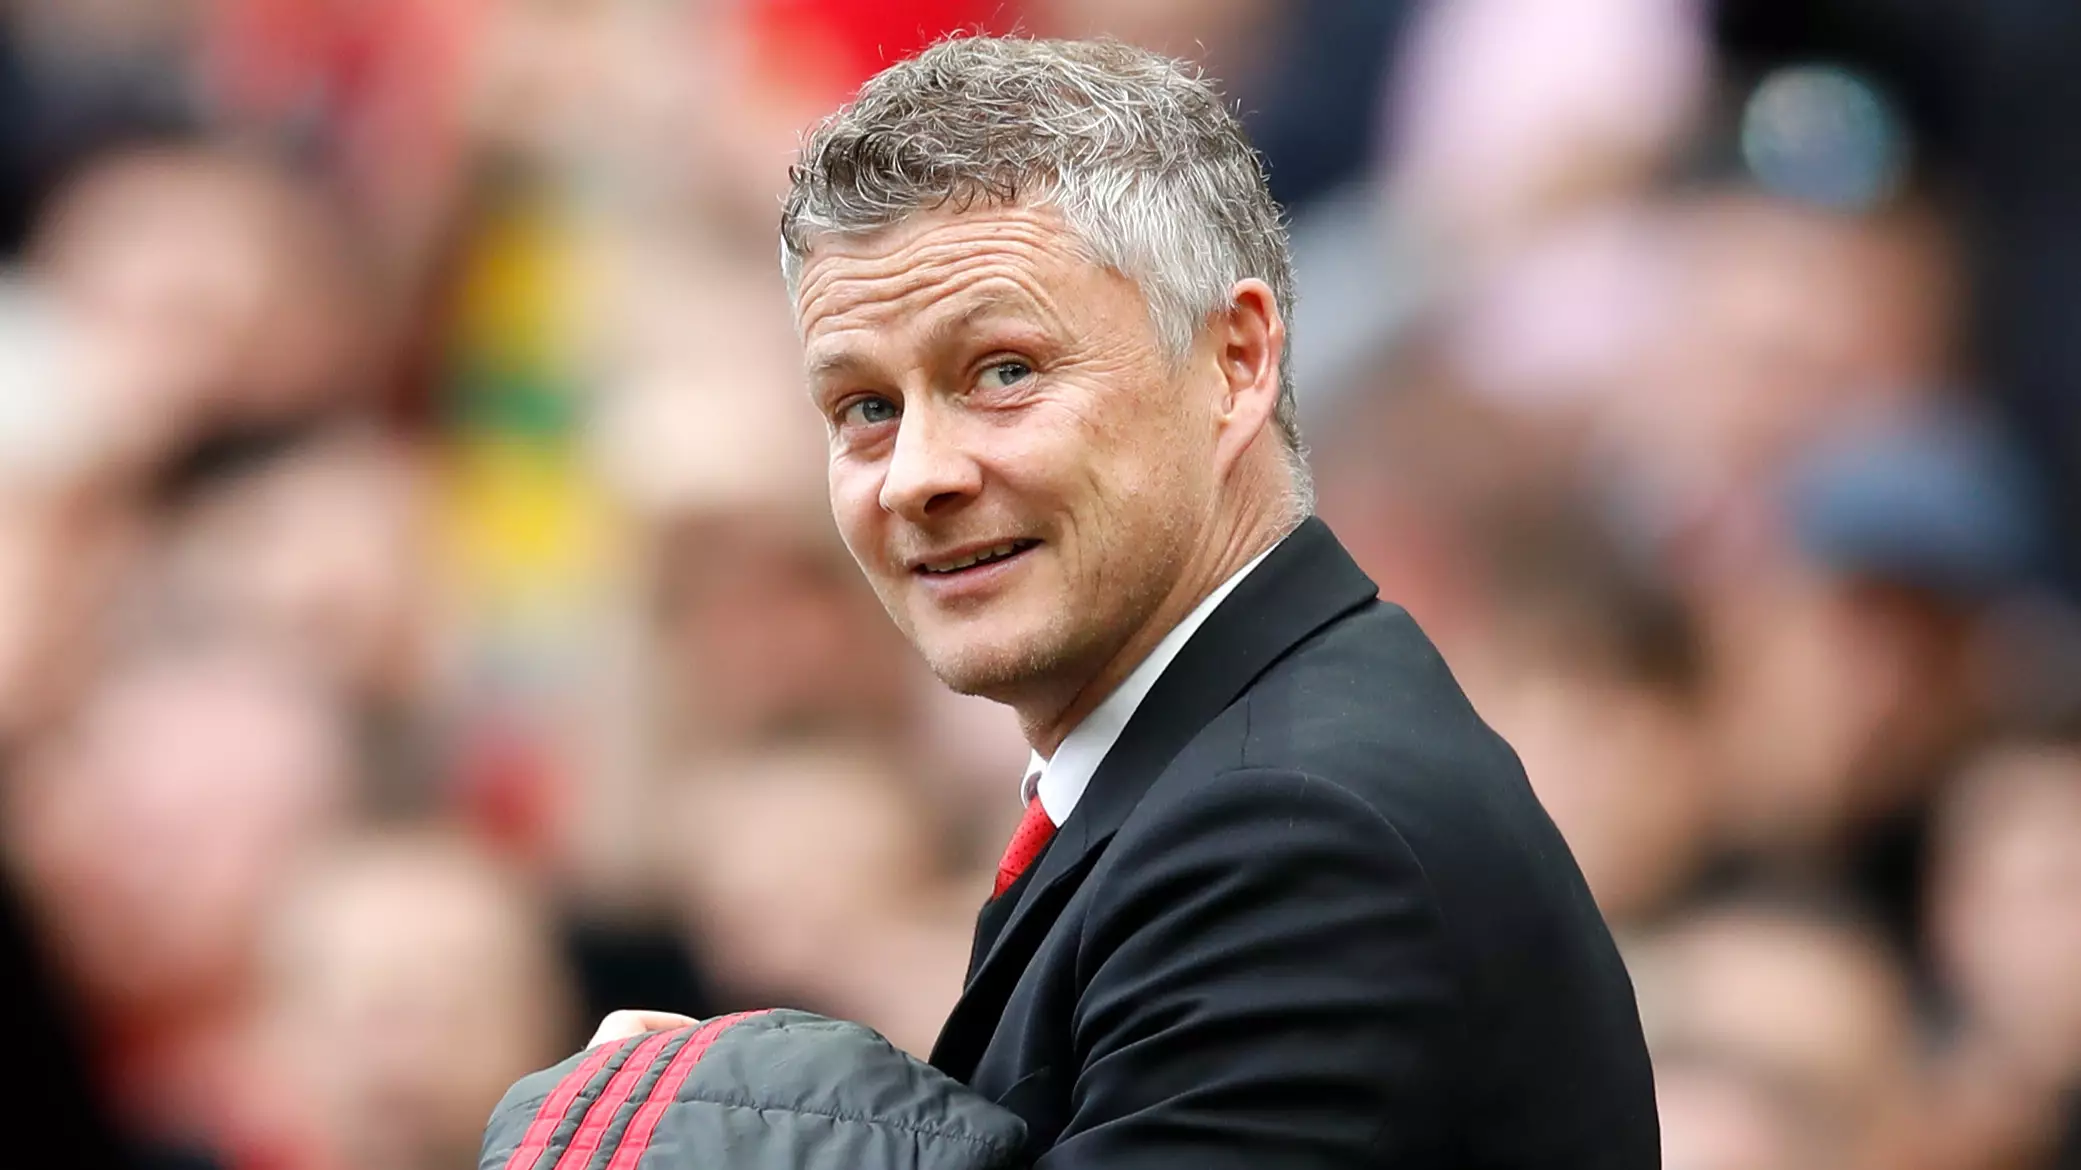 Solskjaer will hope to get a better return from his forwards next season. Image: PA Images